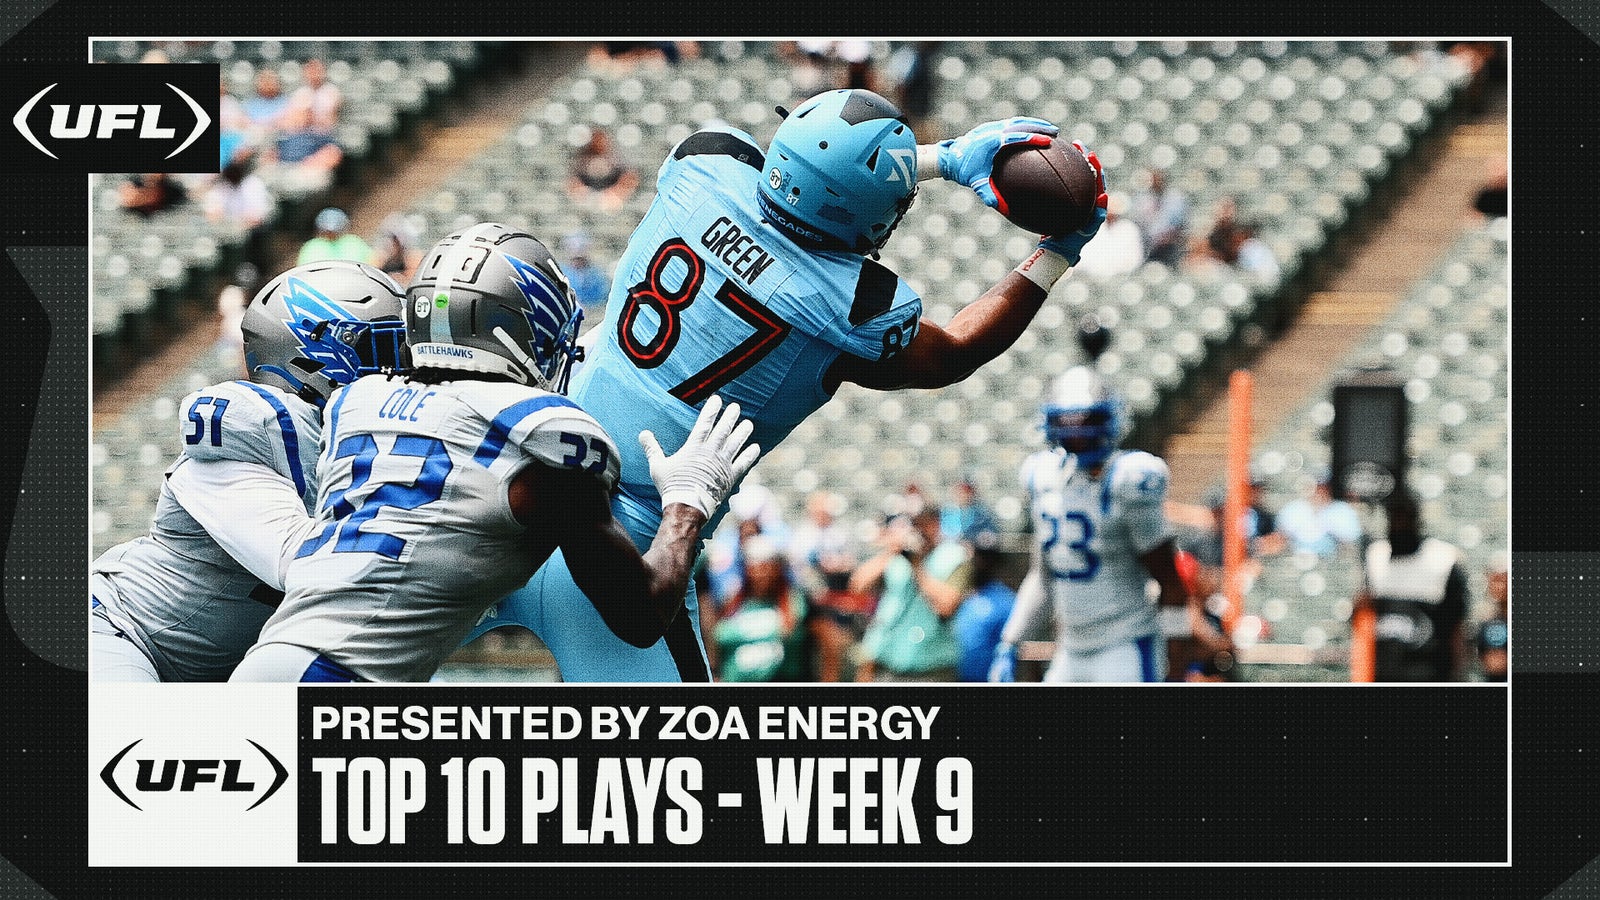 UFL top 10 plays from week 9 presented by ZOA Energy | United Football League